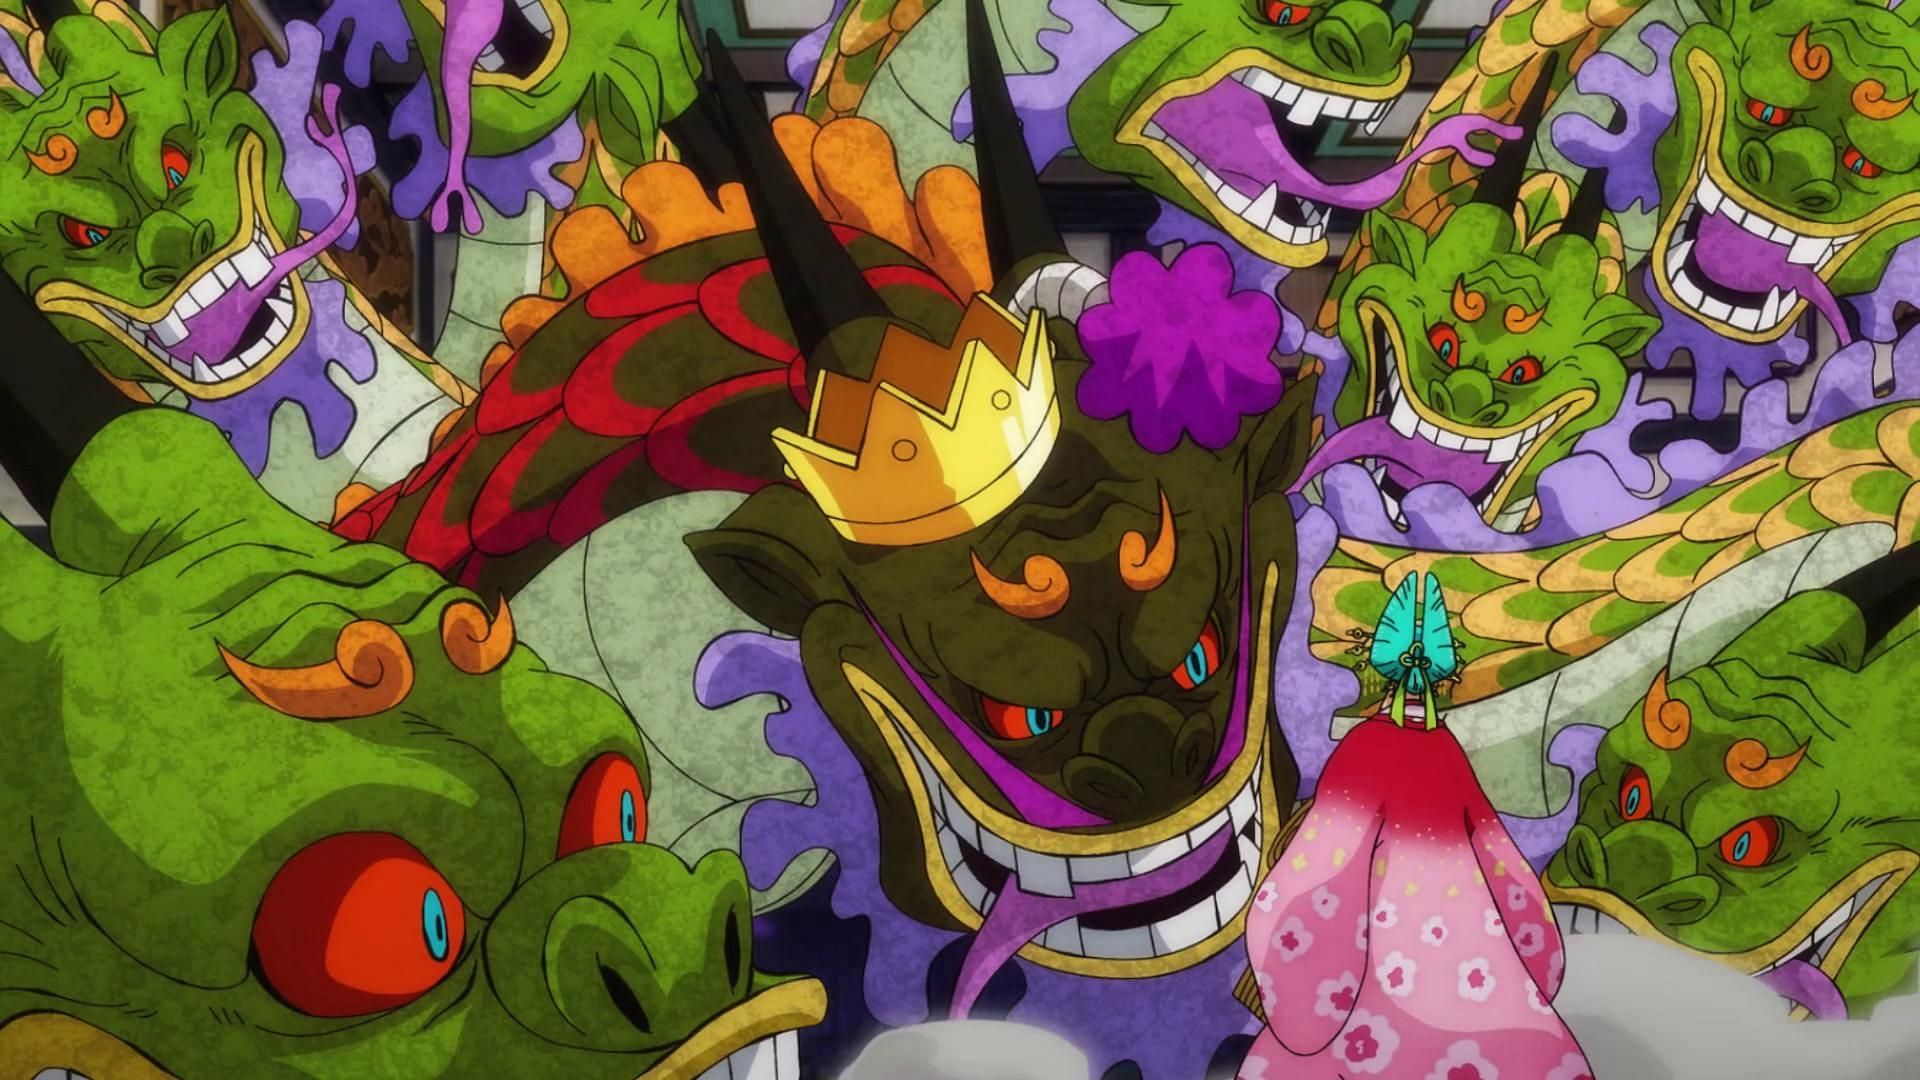 One Piece: 5 Most Powerful Mythical Zoan Devil Fruits That